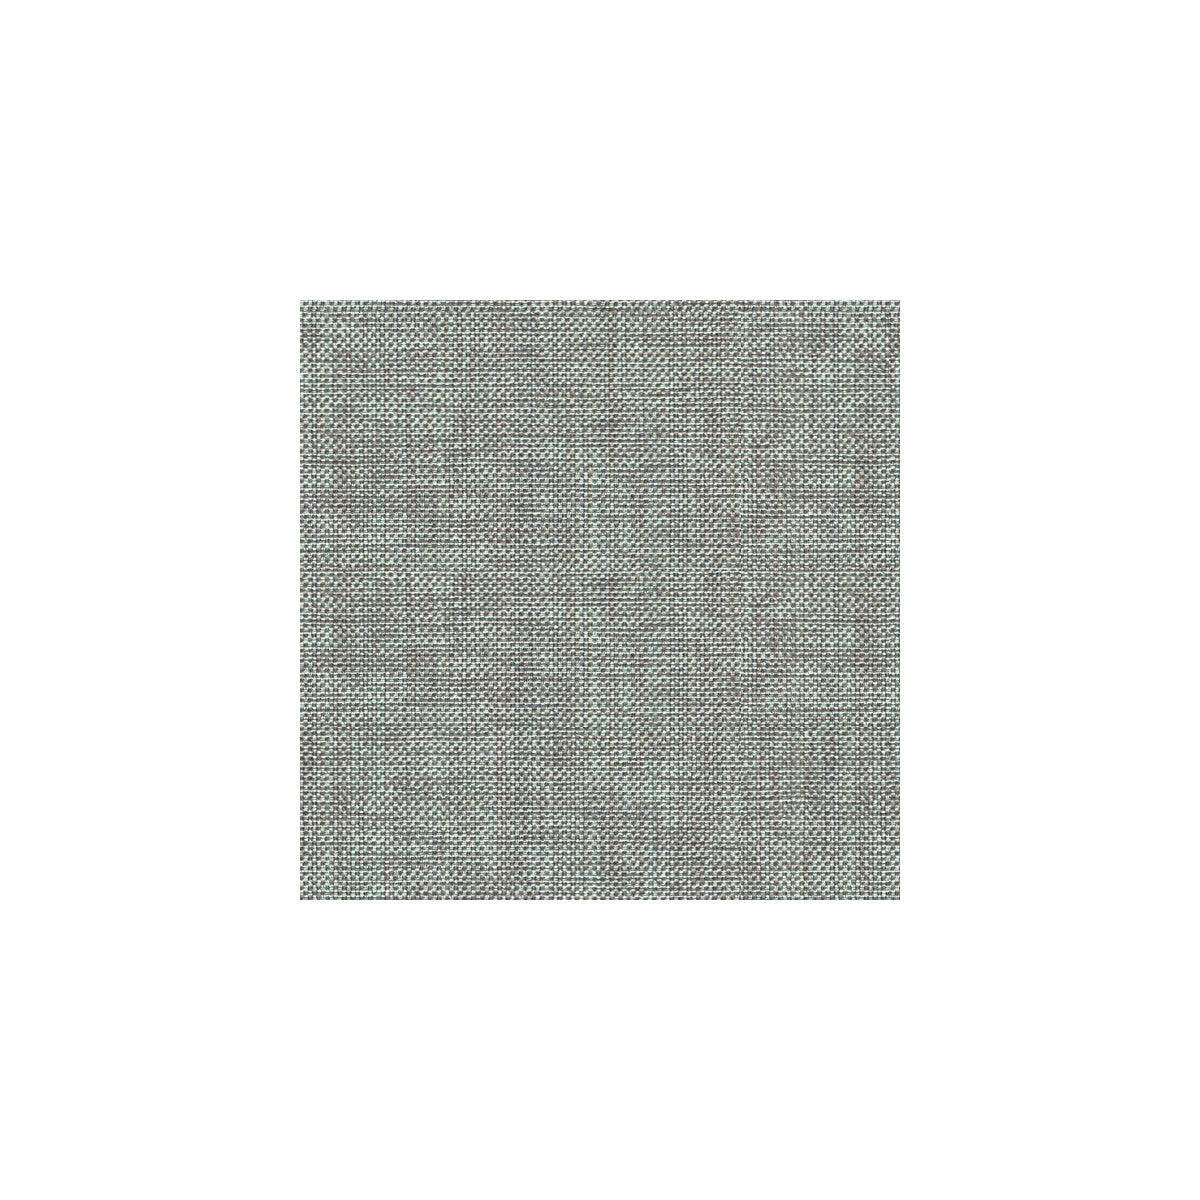 Kravet Basics fabric in 30299-52 color - pattern 30299.52.0 - by Kravet Basics in the Perfect Plains collection